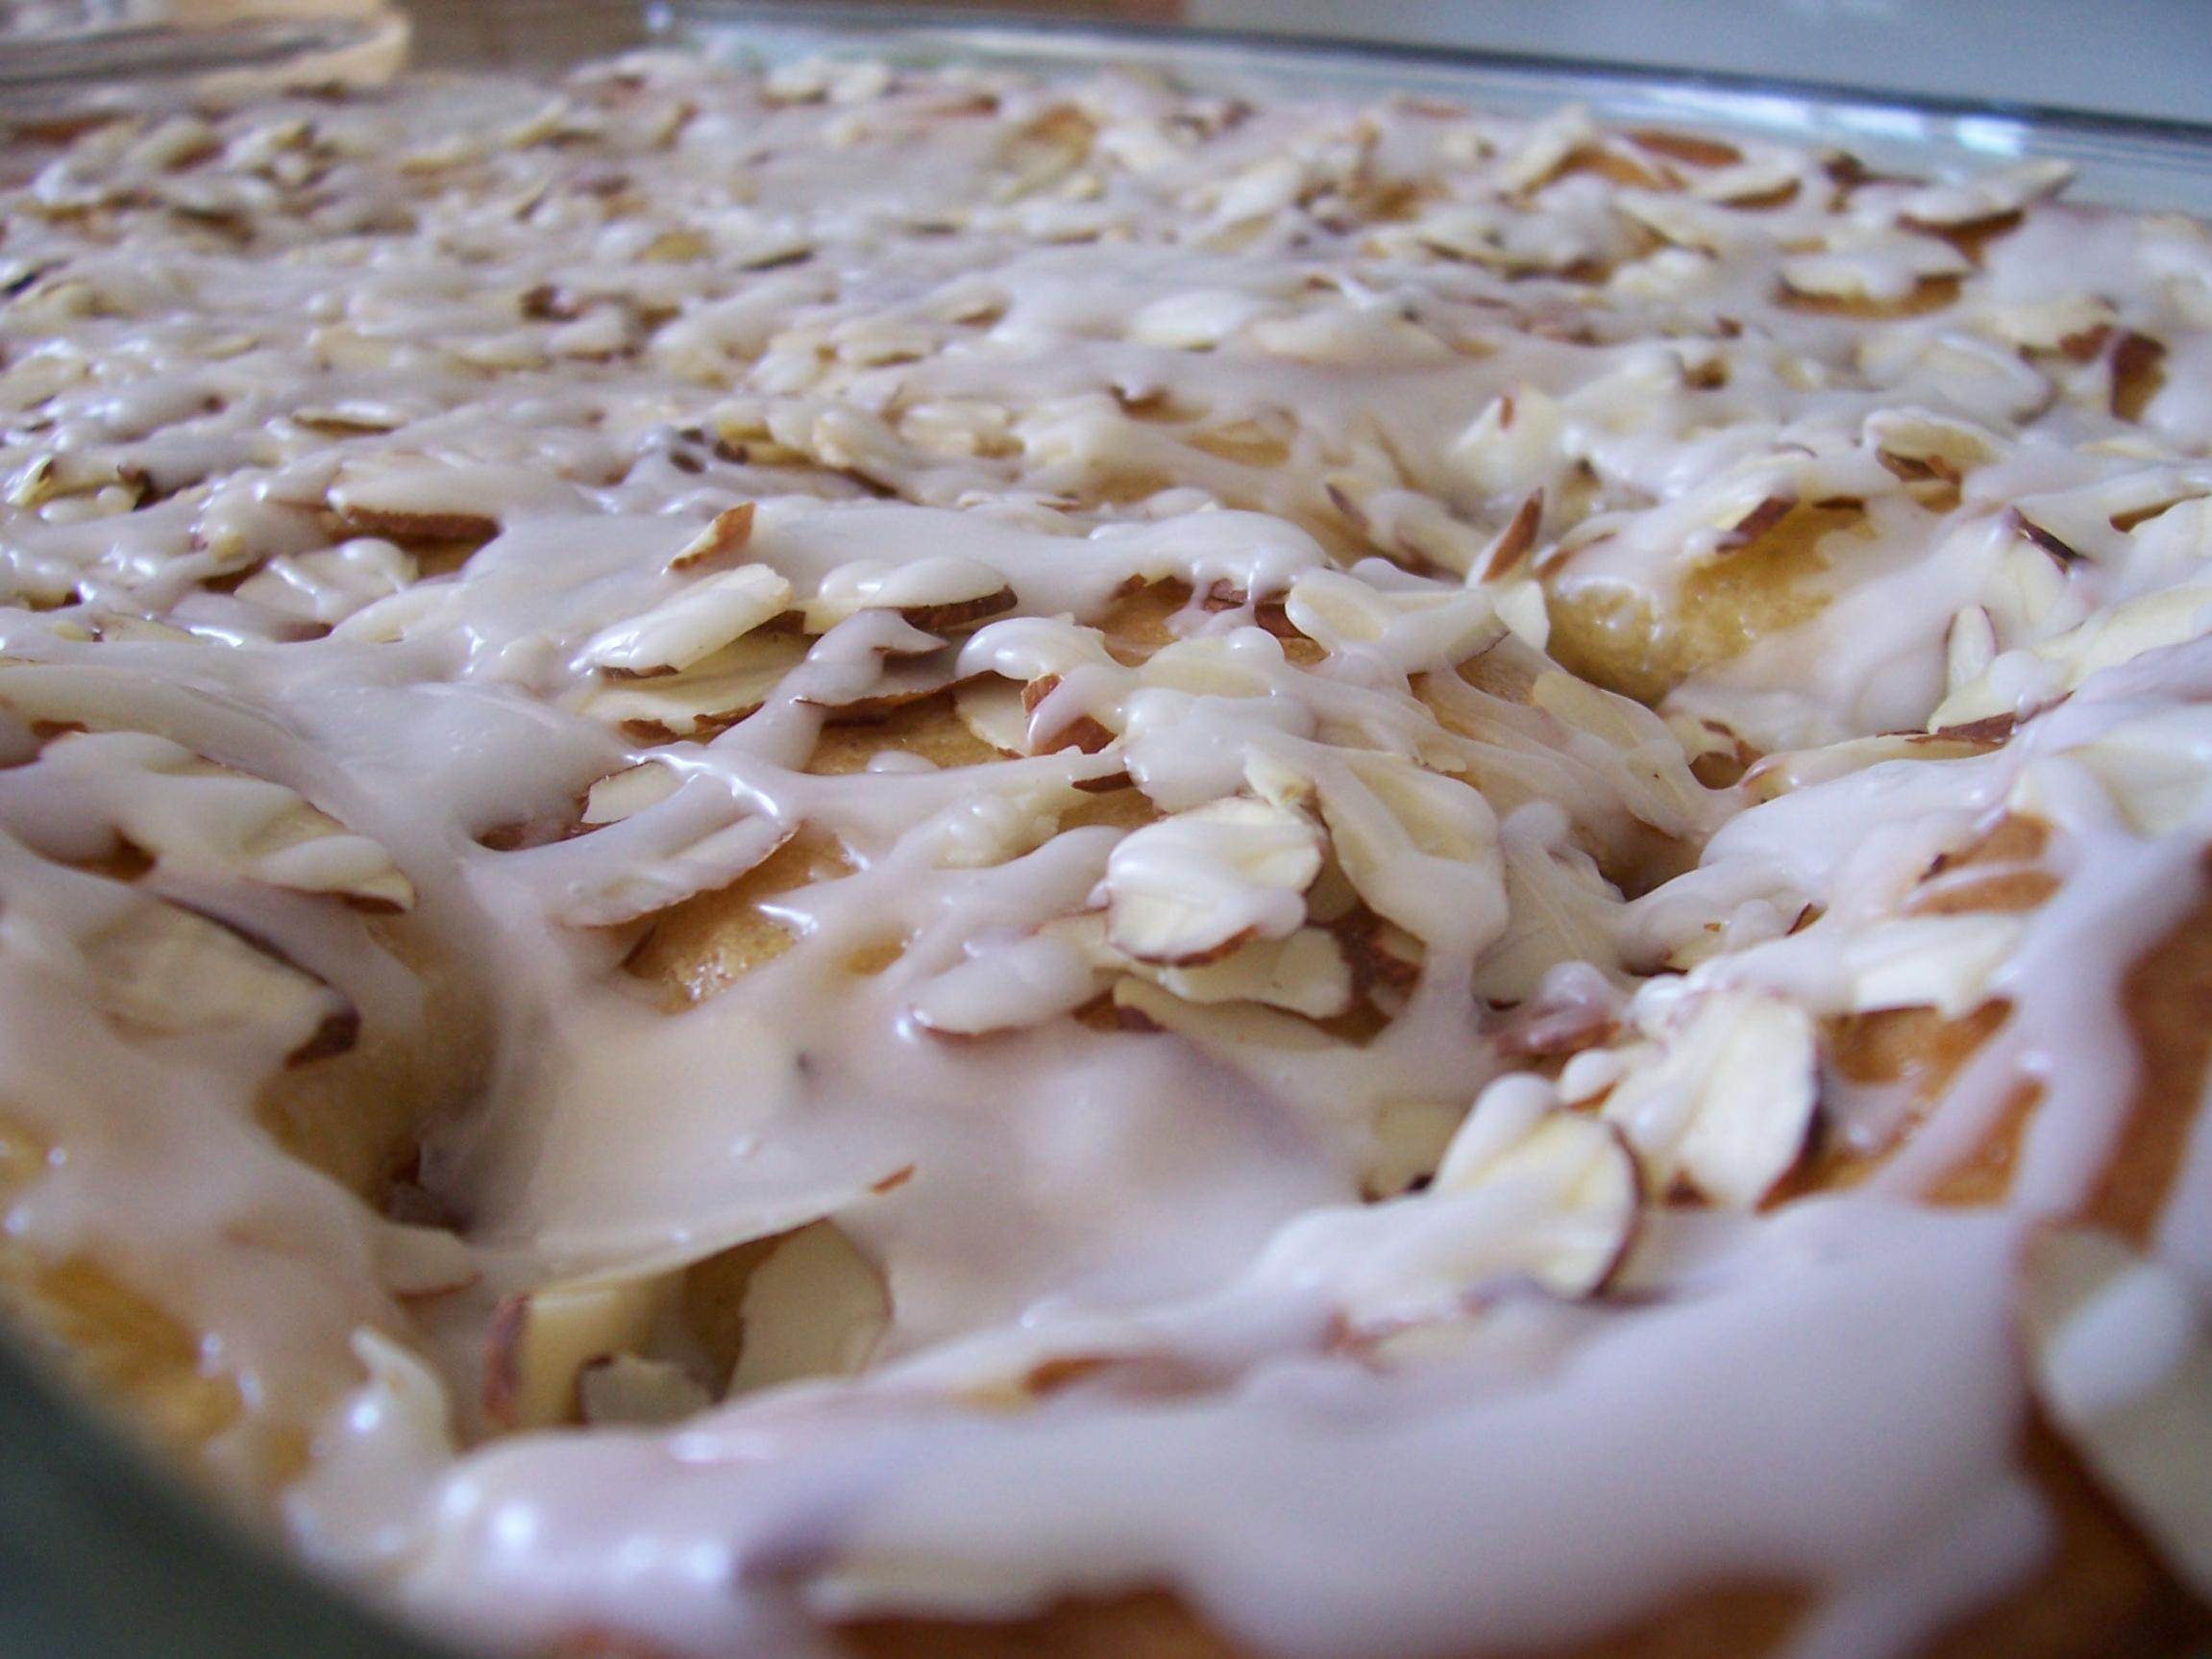  Sweeten up your morning routine with this Fruit Filled Coffee Cake